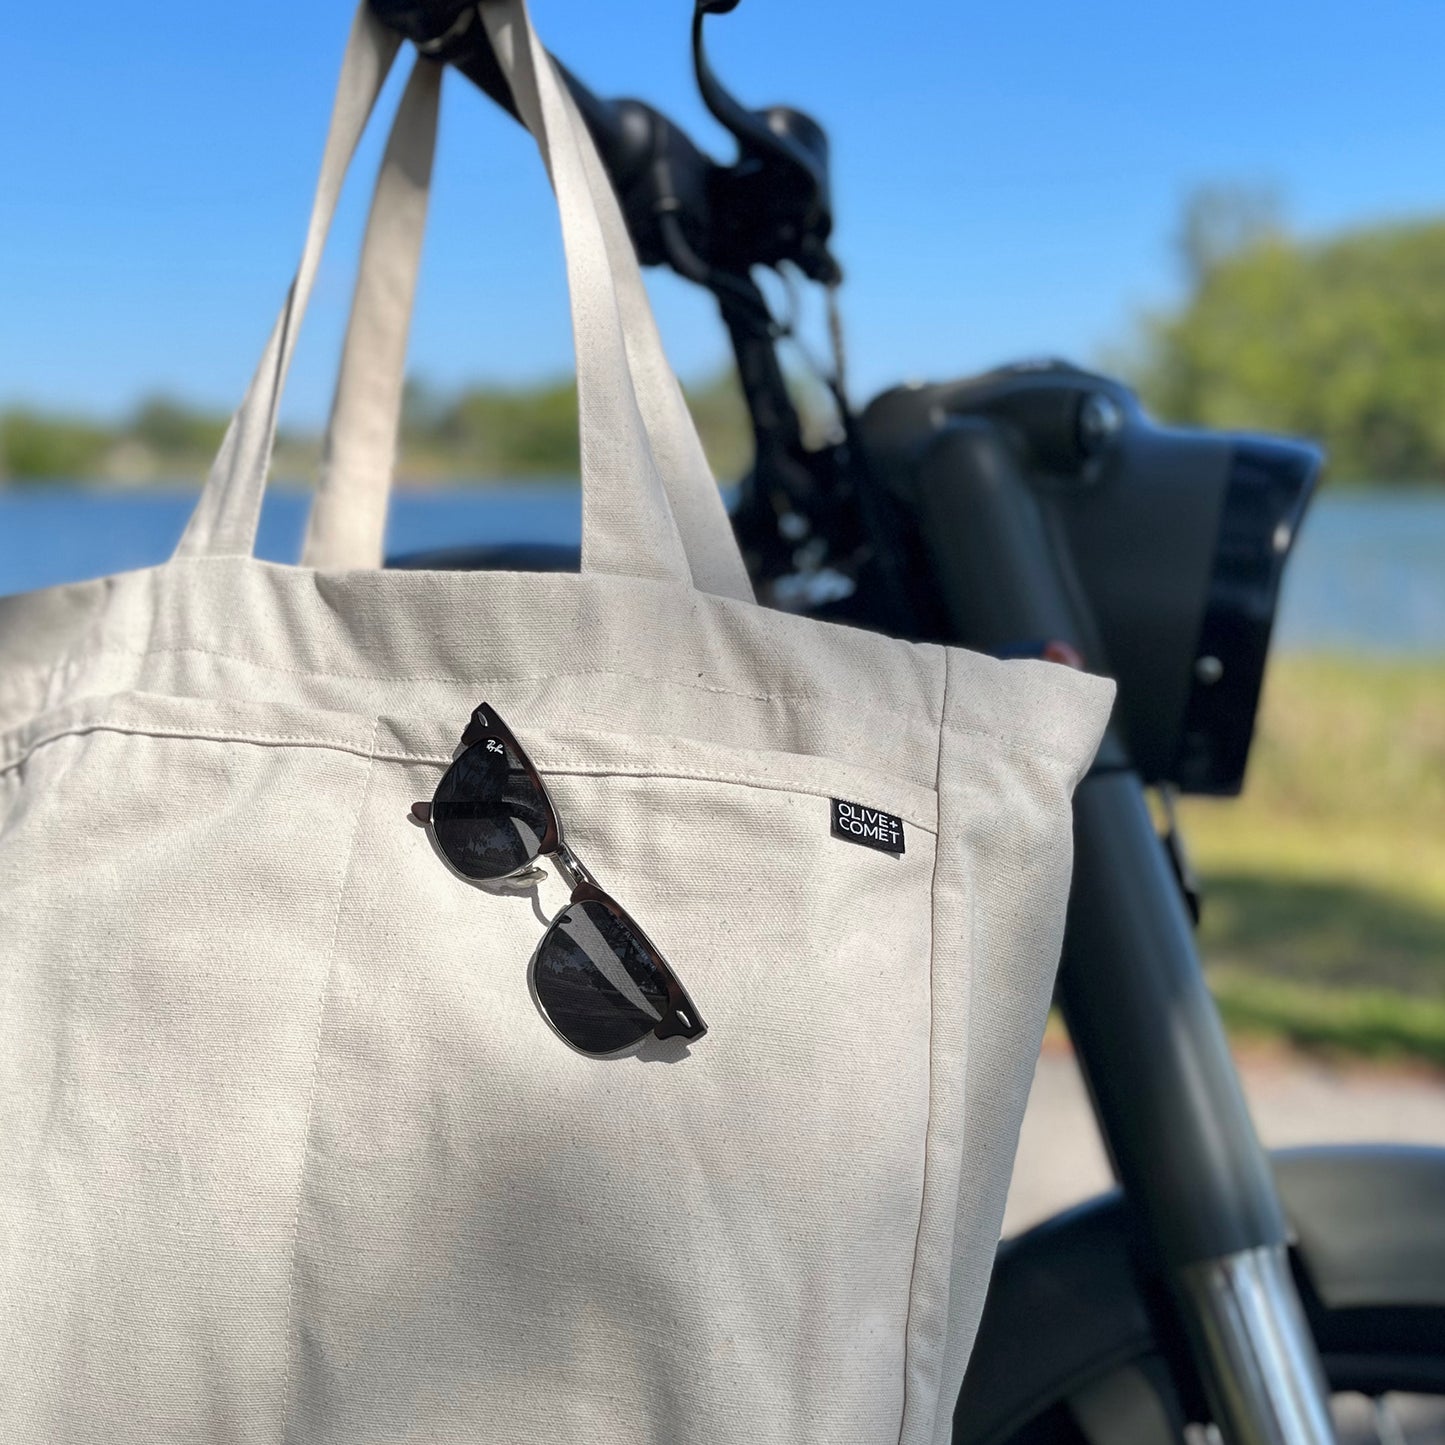 A Sonoma bag hangs on the handlebars of a vintage motorcycle